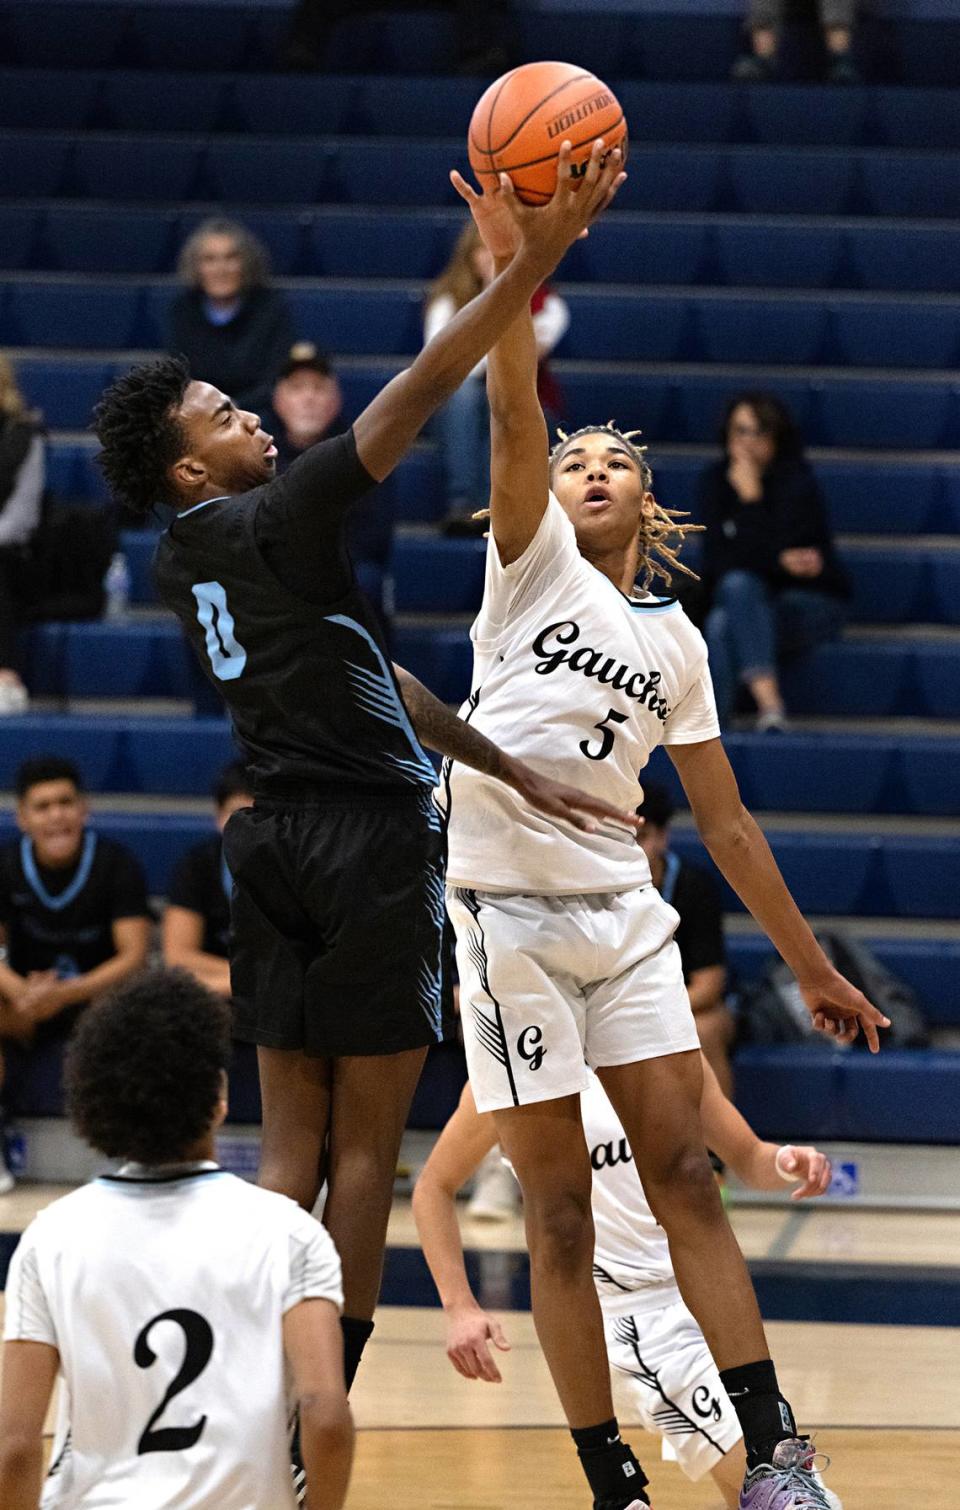 Downey’s Reuben Lewis drives to the basket as El Capitan’s Anthony Jones defends during the Mark Gallo Invitational Basketball Tournament at Central Catholic High School in Modesto, Calif., Friday, Dec. 8, 2023. El Capitain won the game 54-44.